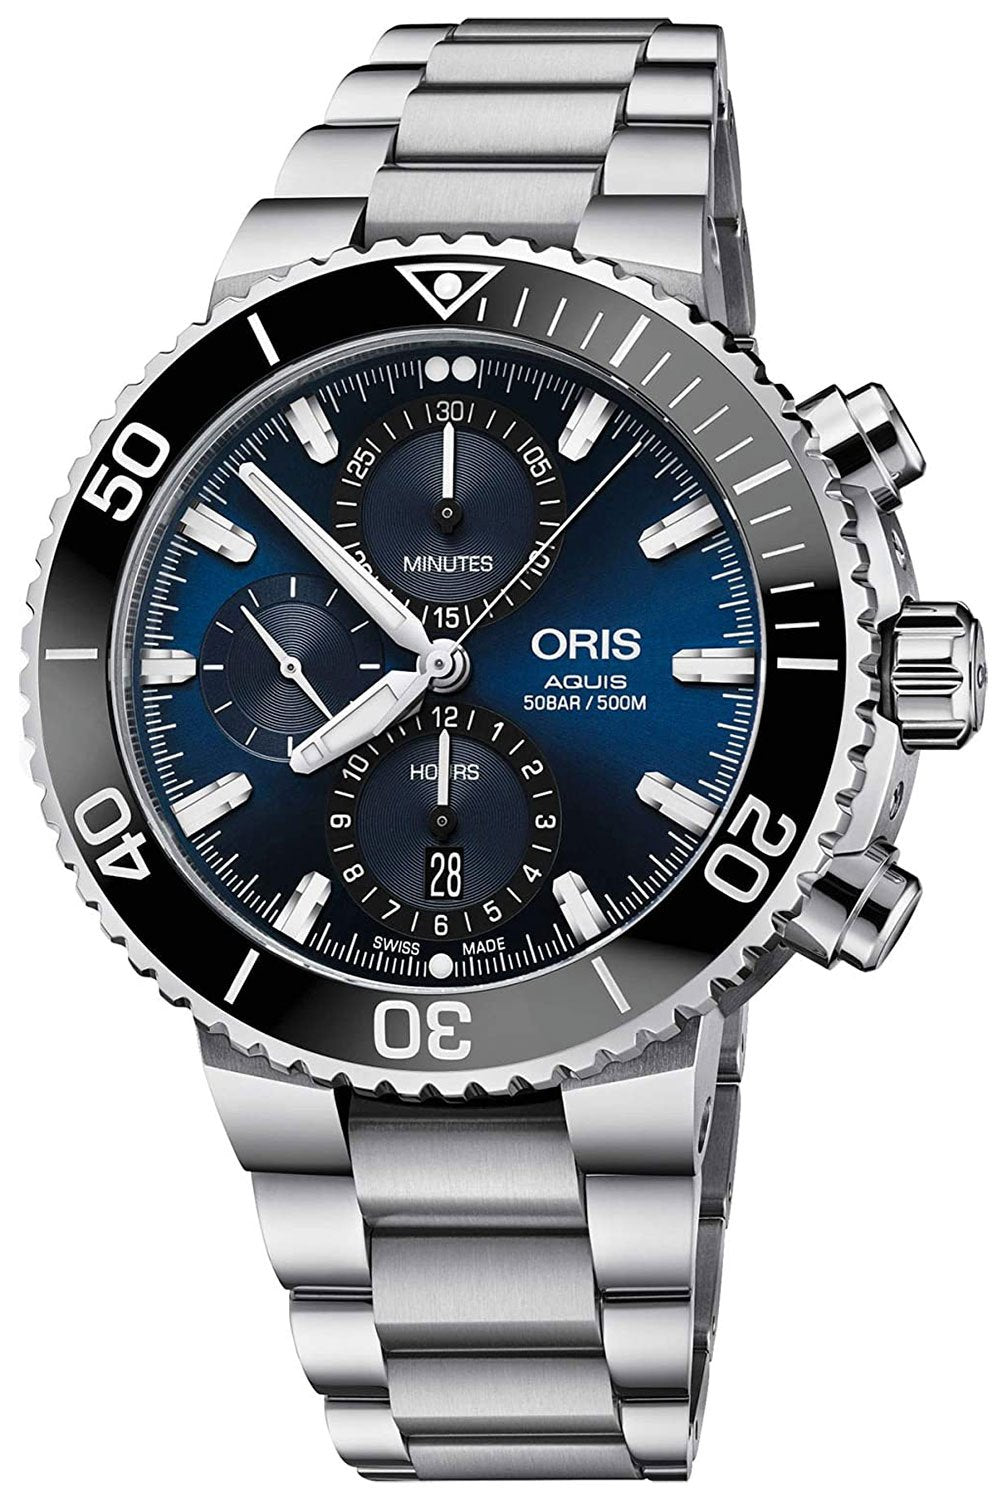 Watches - Mens-Oris-774 7743 4155-MB-12-hour display, 40 - 45 mm, 45 - 50 mm, Aquis, blue, chronograph, date, divers, mens, menswatches, new arrivals, Oris, round, seconds sub-dial, stainless steel band, stainless steel case, swiss automatic, watches-Watches & Beyond